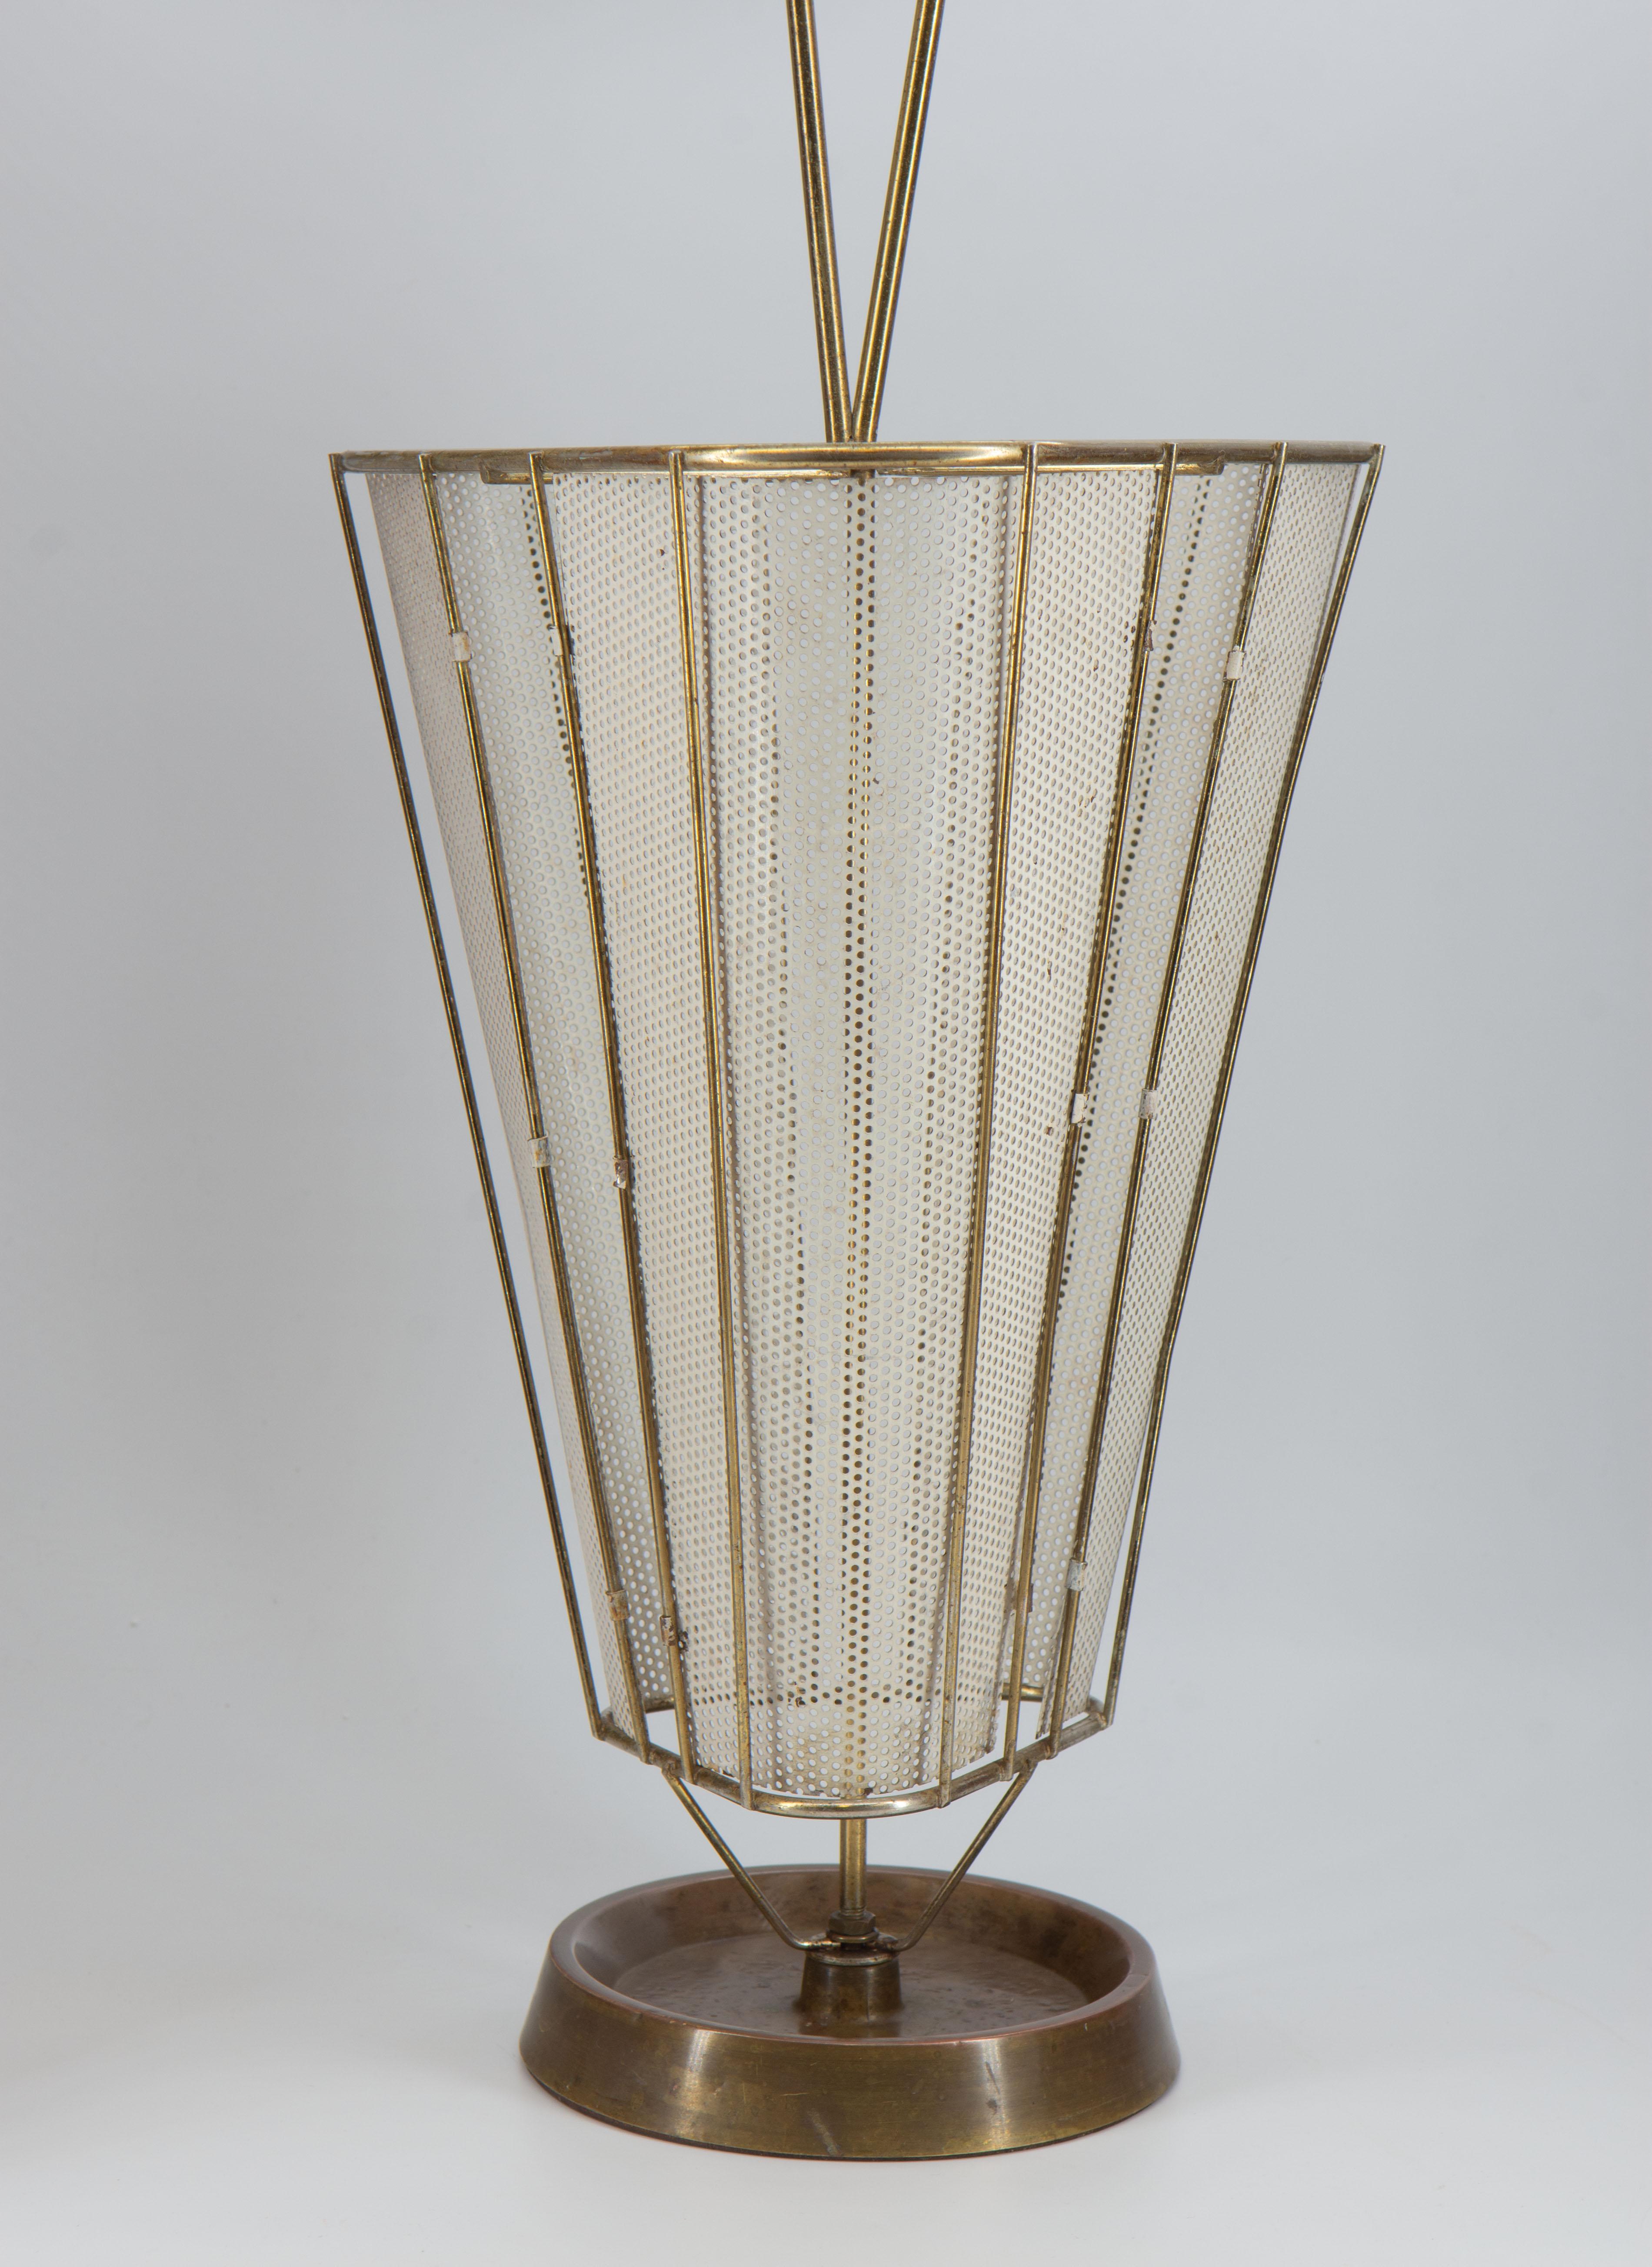 Mid-Century Mathieu Mategot style elegant umbrella stand. Circa 1950. 

Delivery included to mainland UK.

With a tubular metal frame, the stand is composed of off-white basket with perforated detail, terminating in a brass-lined drip tray over